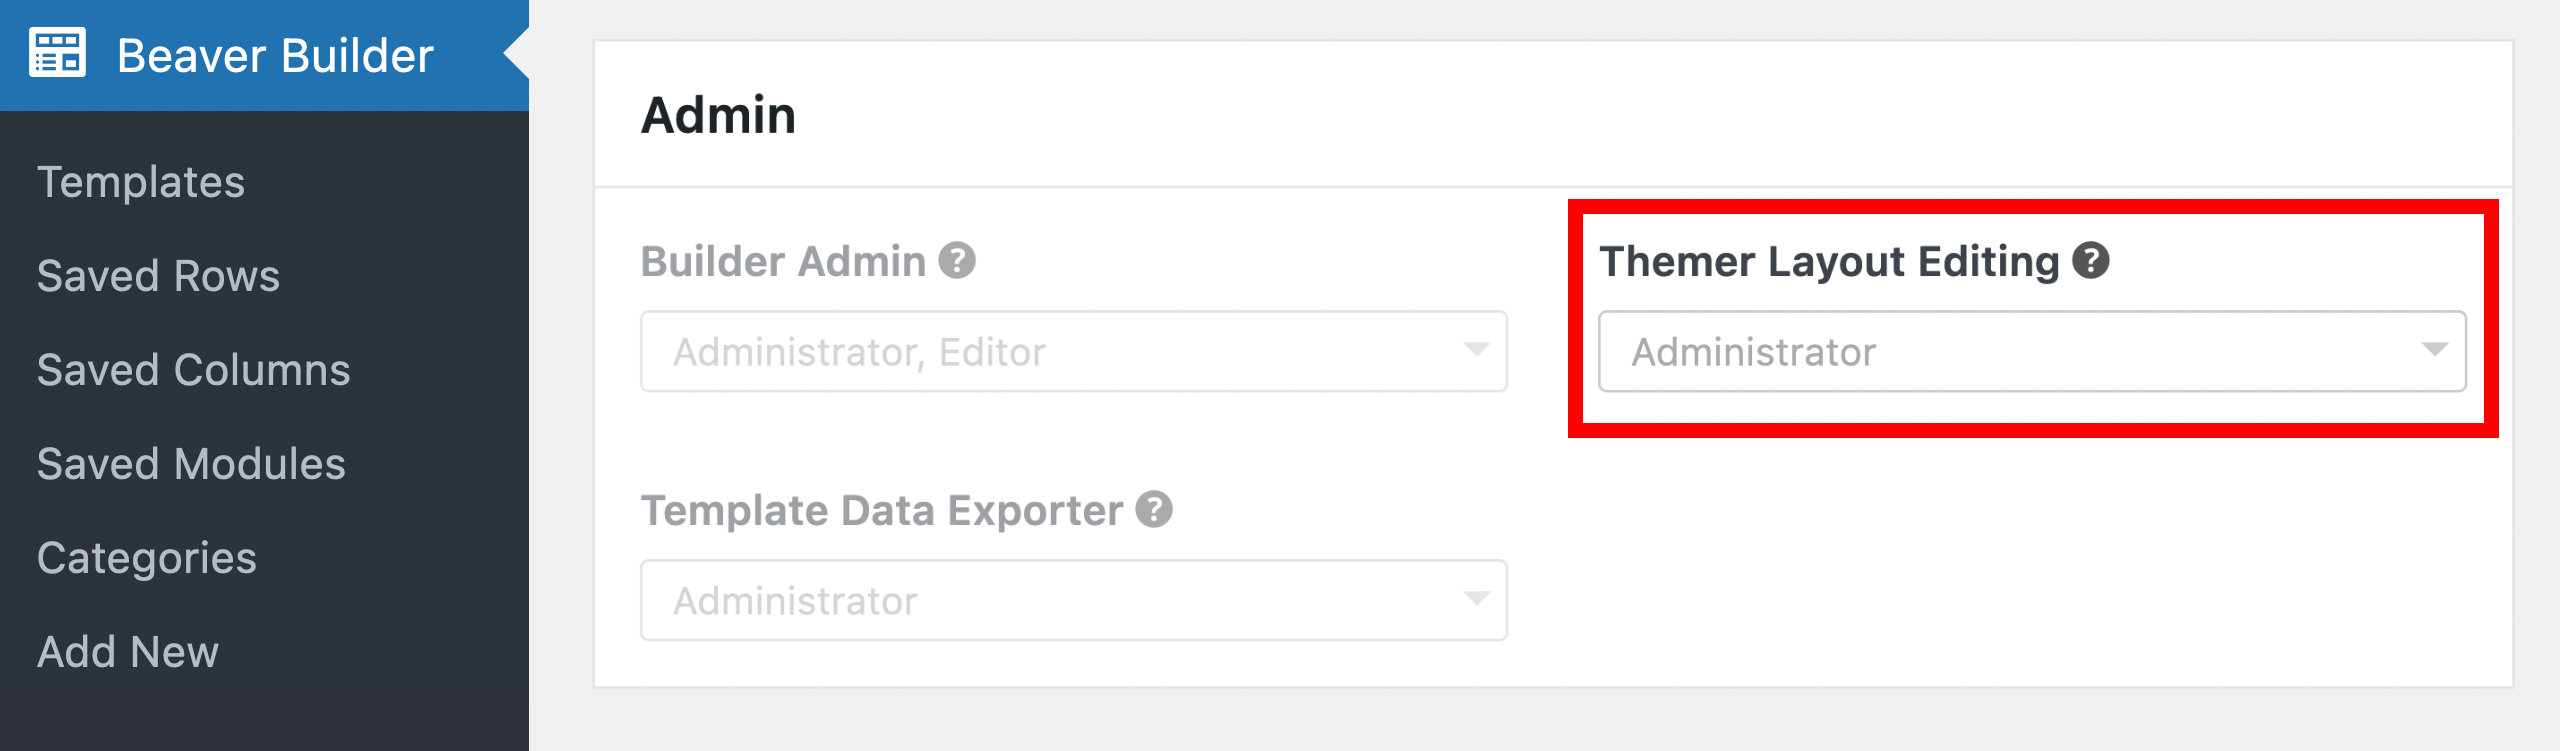 Themer Layout Editing restriction